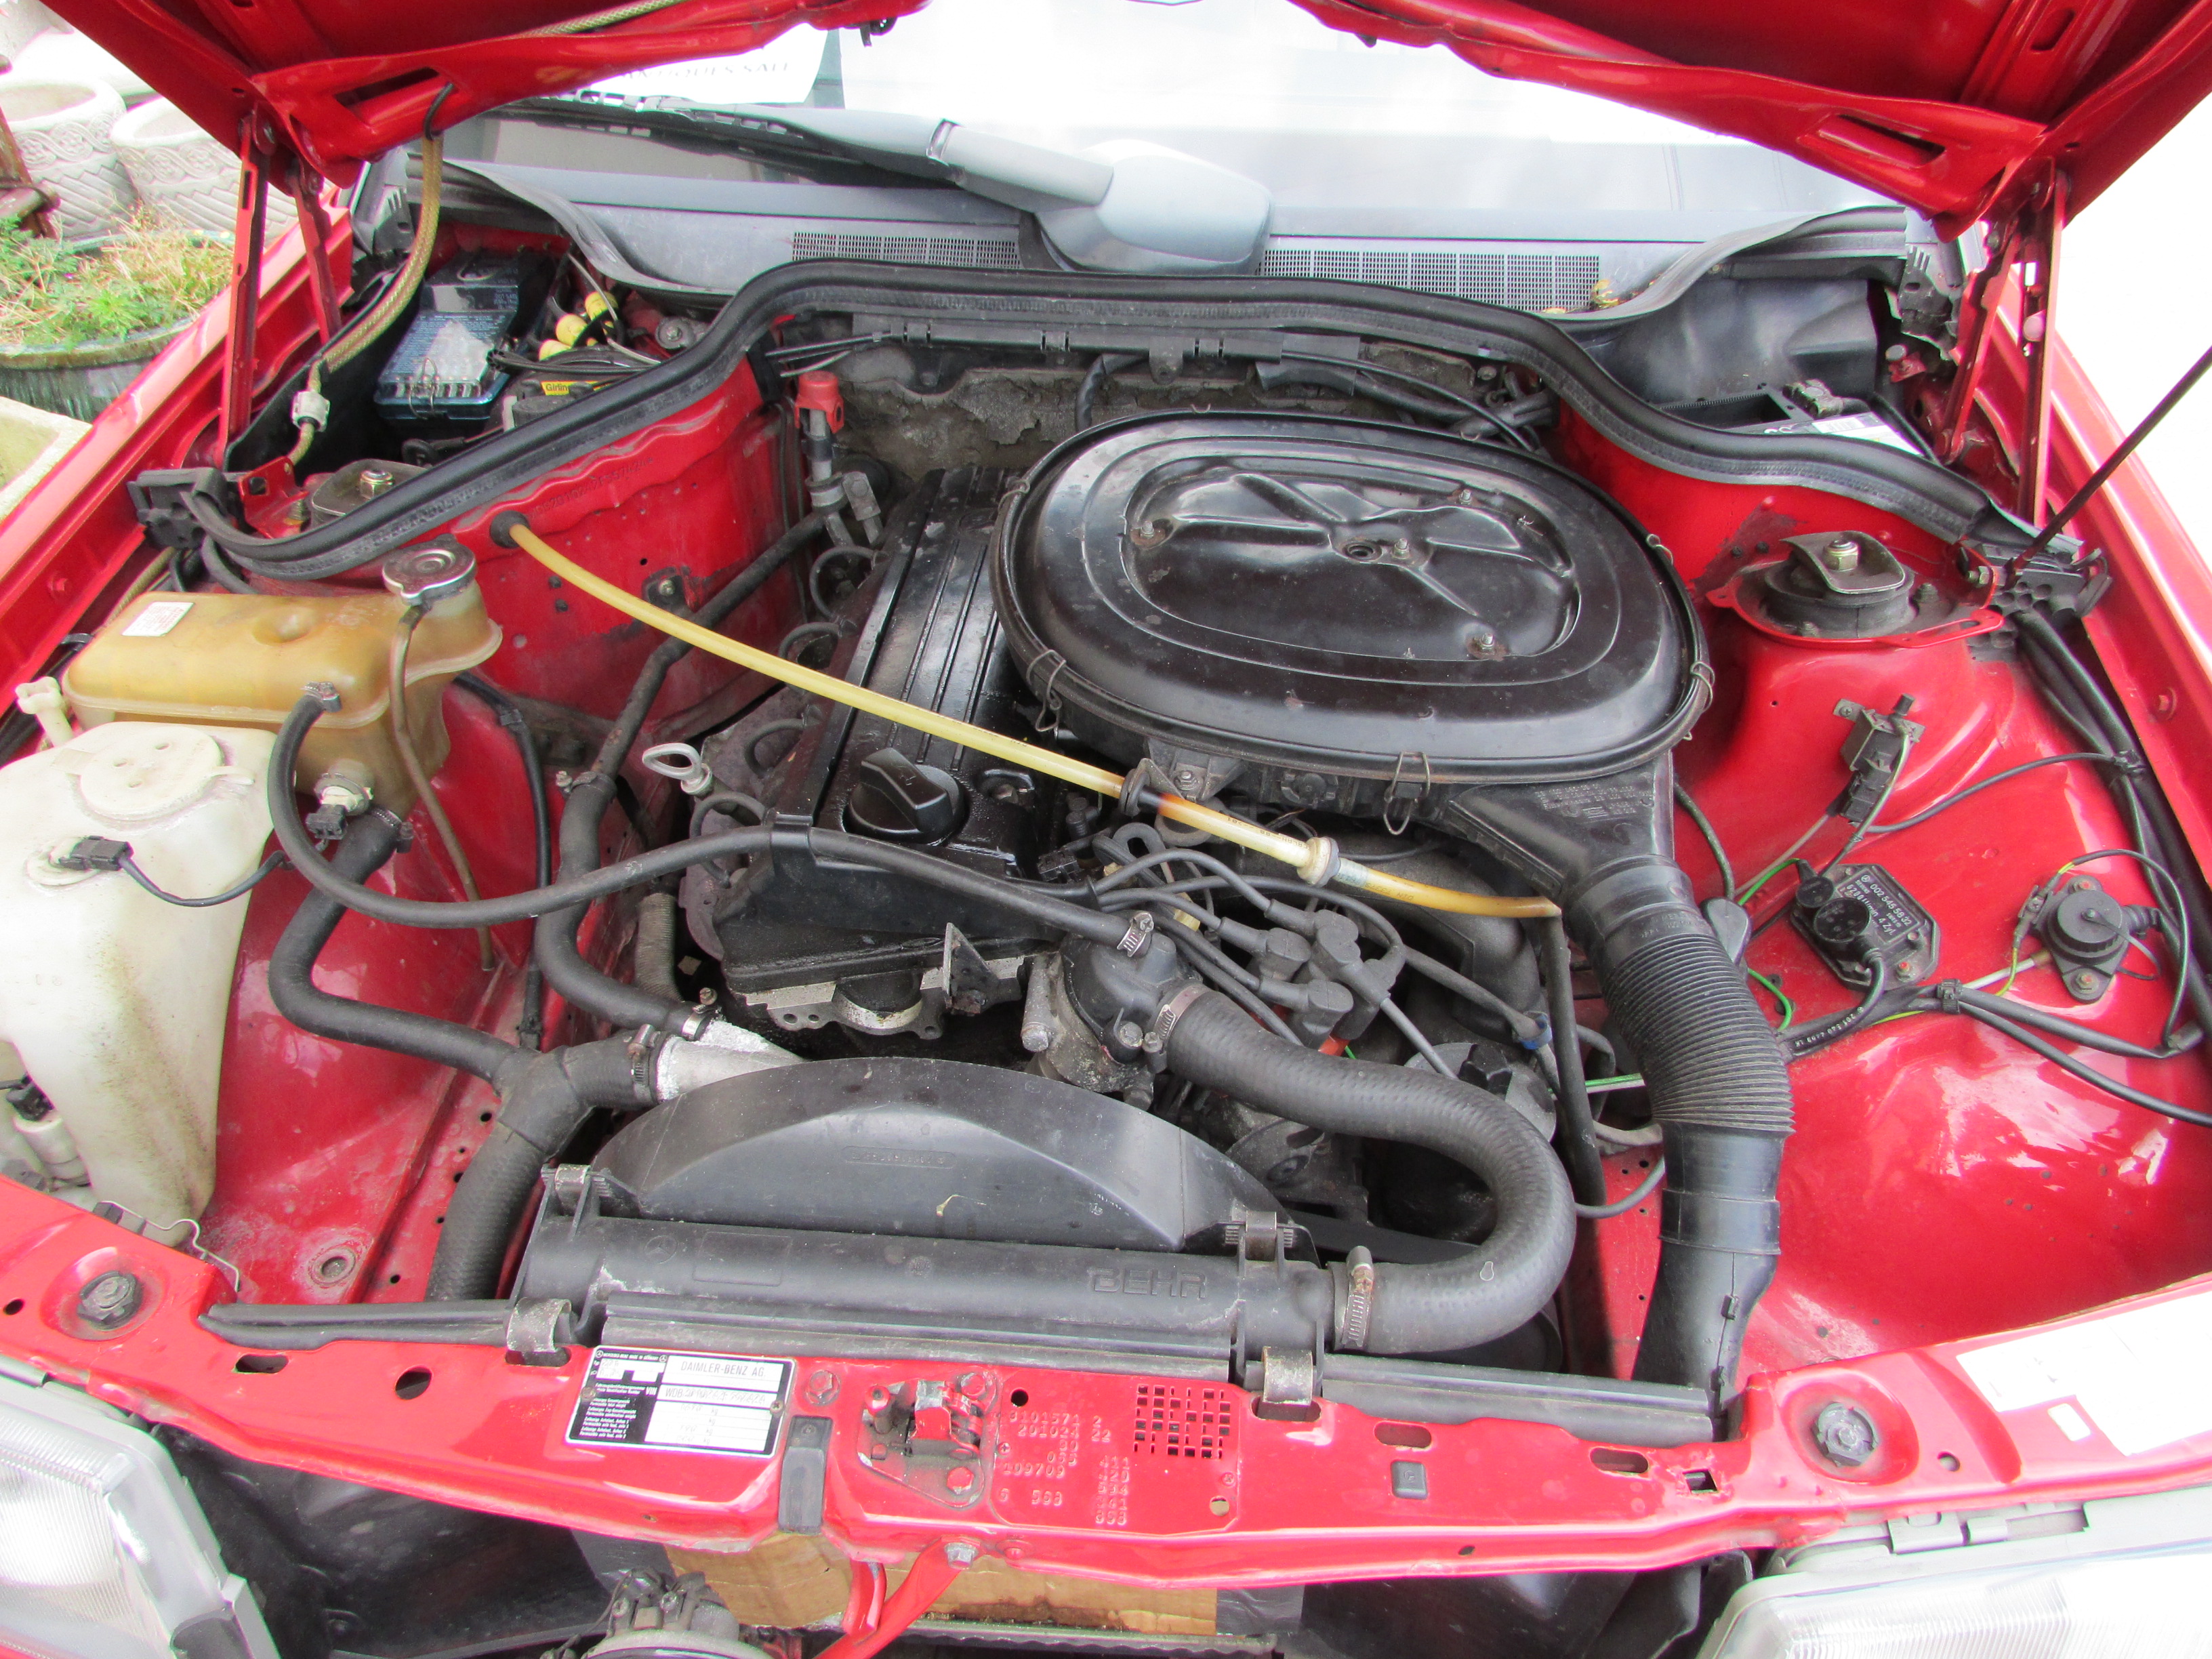 Red Mercedes 190E automatic four-door saloon, 1997 cc petrol engine, F735 NTT registered 06/09/89, - Image 5 of 12